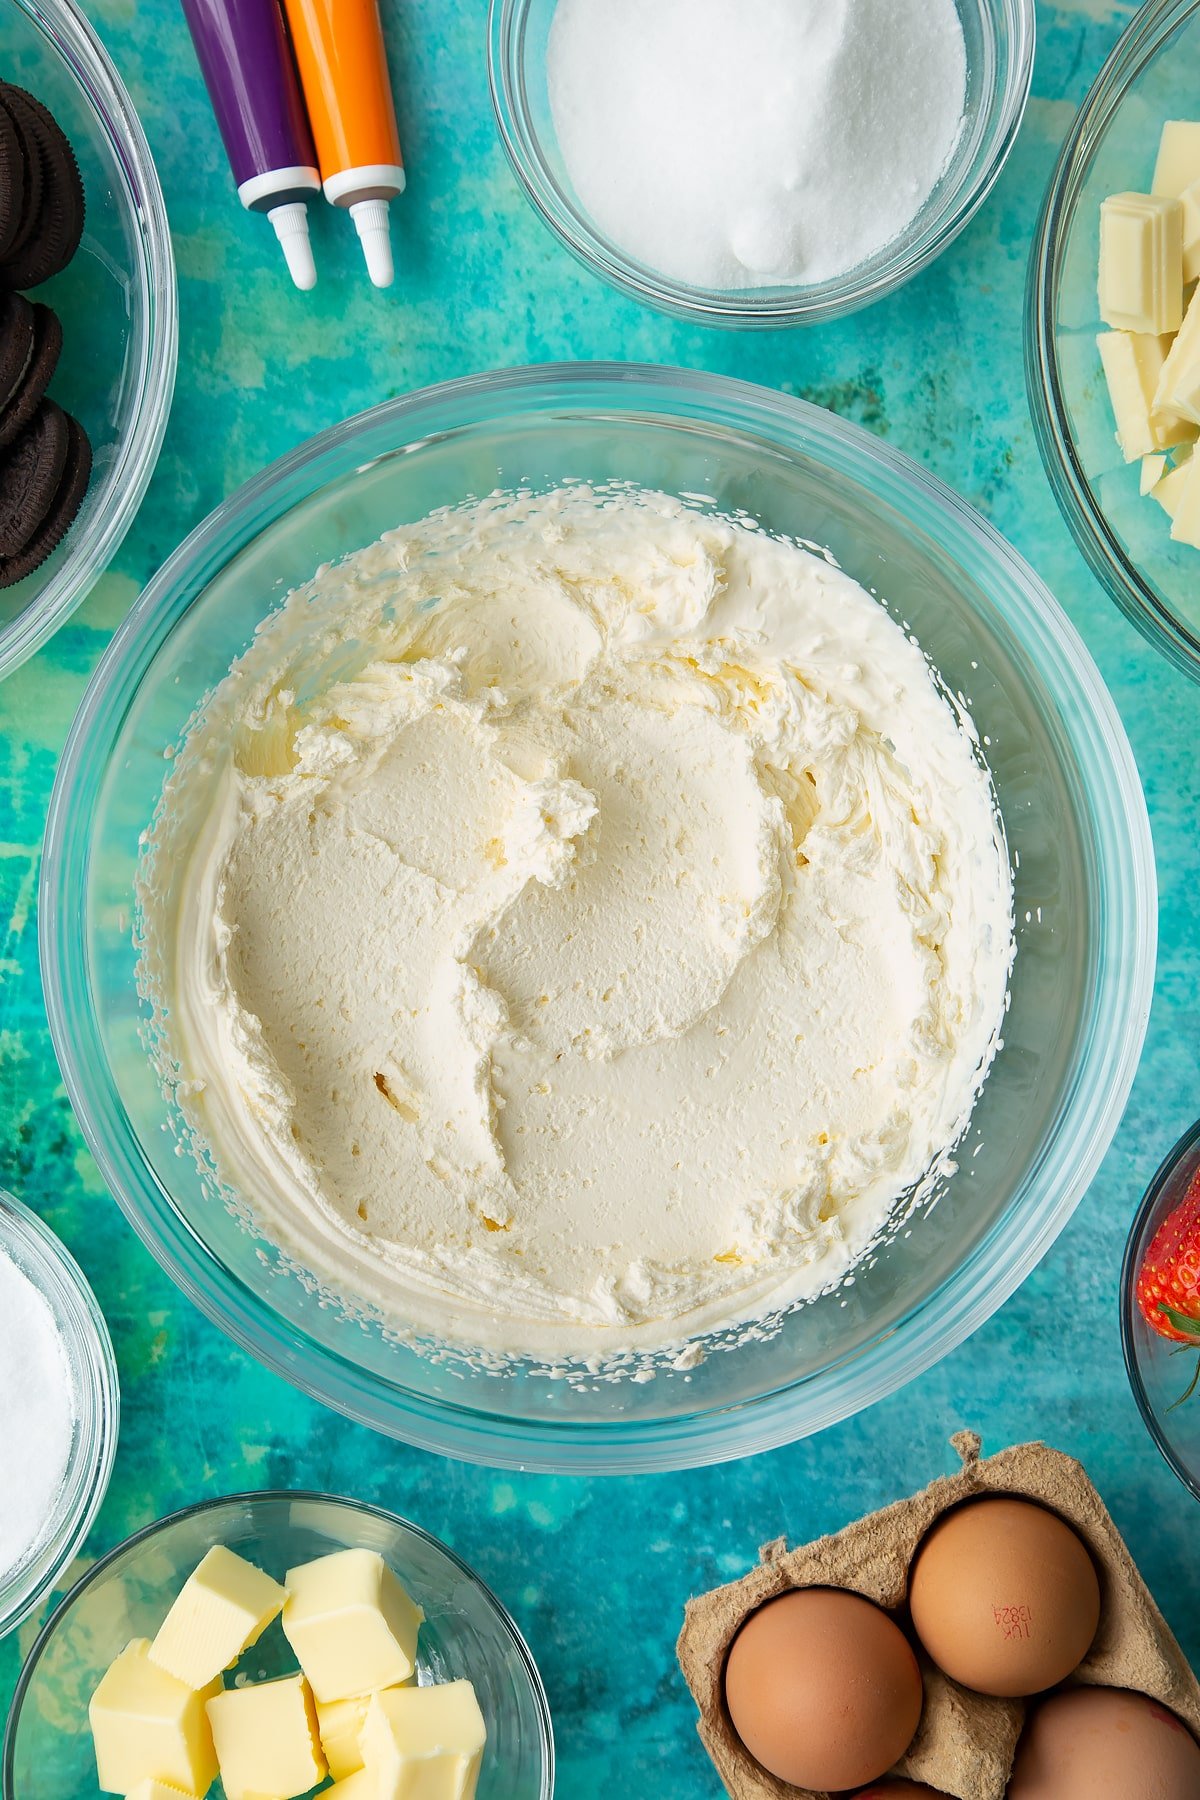 Whipped cream in a bowl. Ingredients to make Halloween cheesecake surround the bowl.